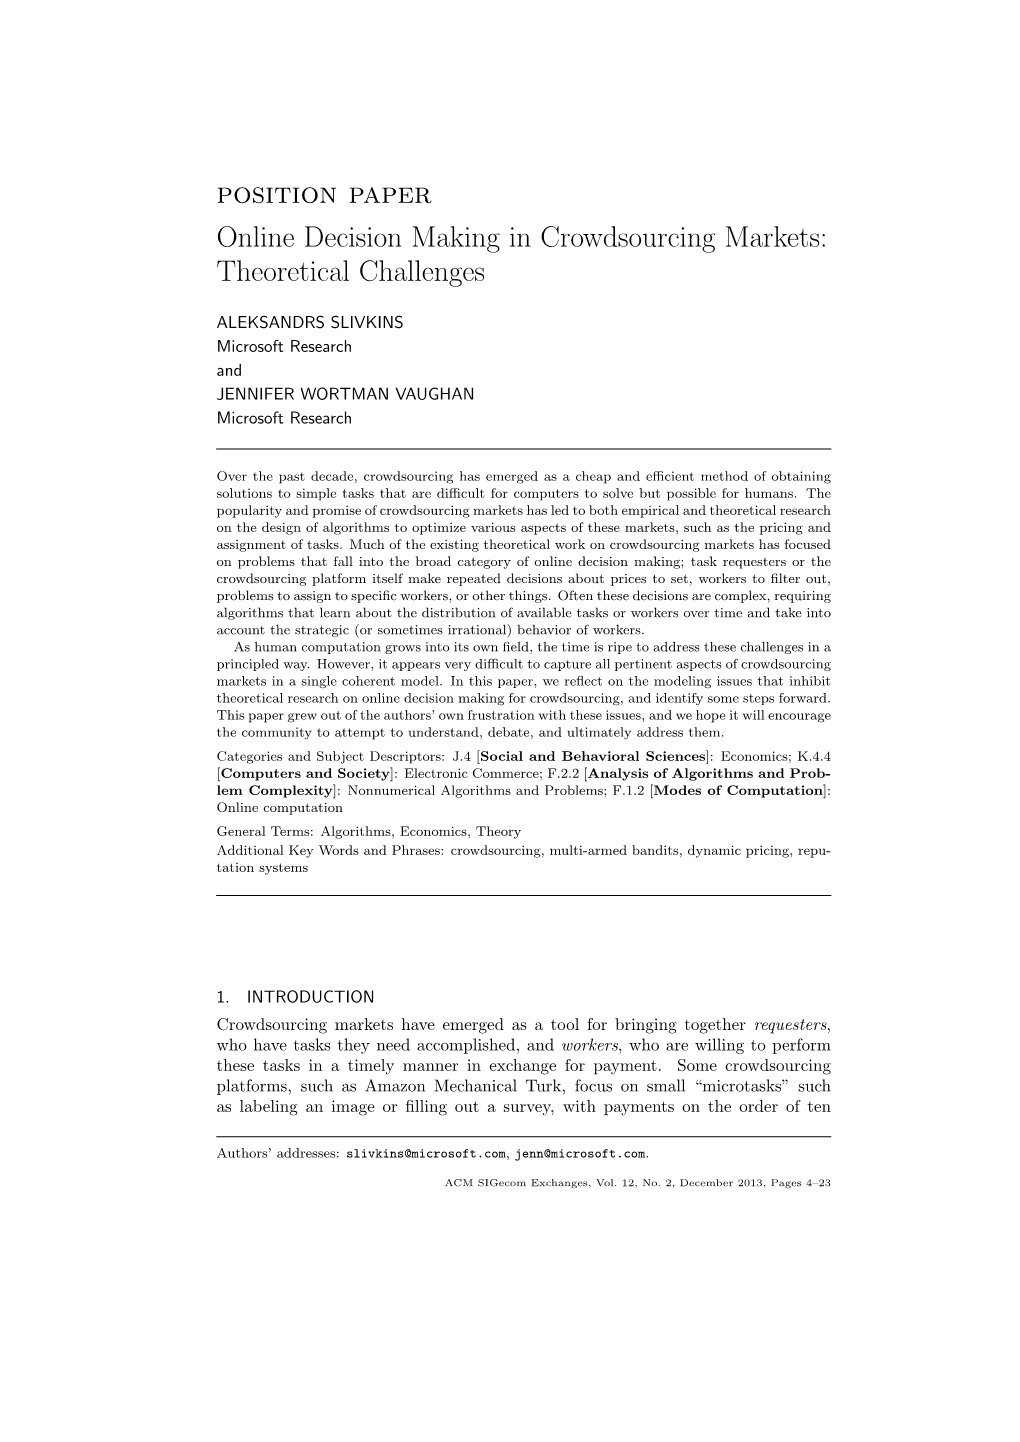 Position Paper Online Decision Making in Crowdsourcing Markets: Theoretical Challenges